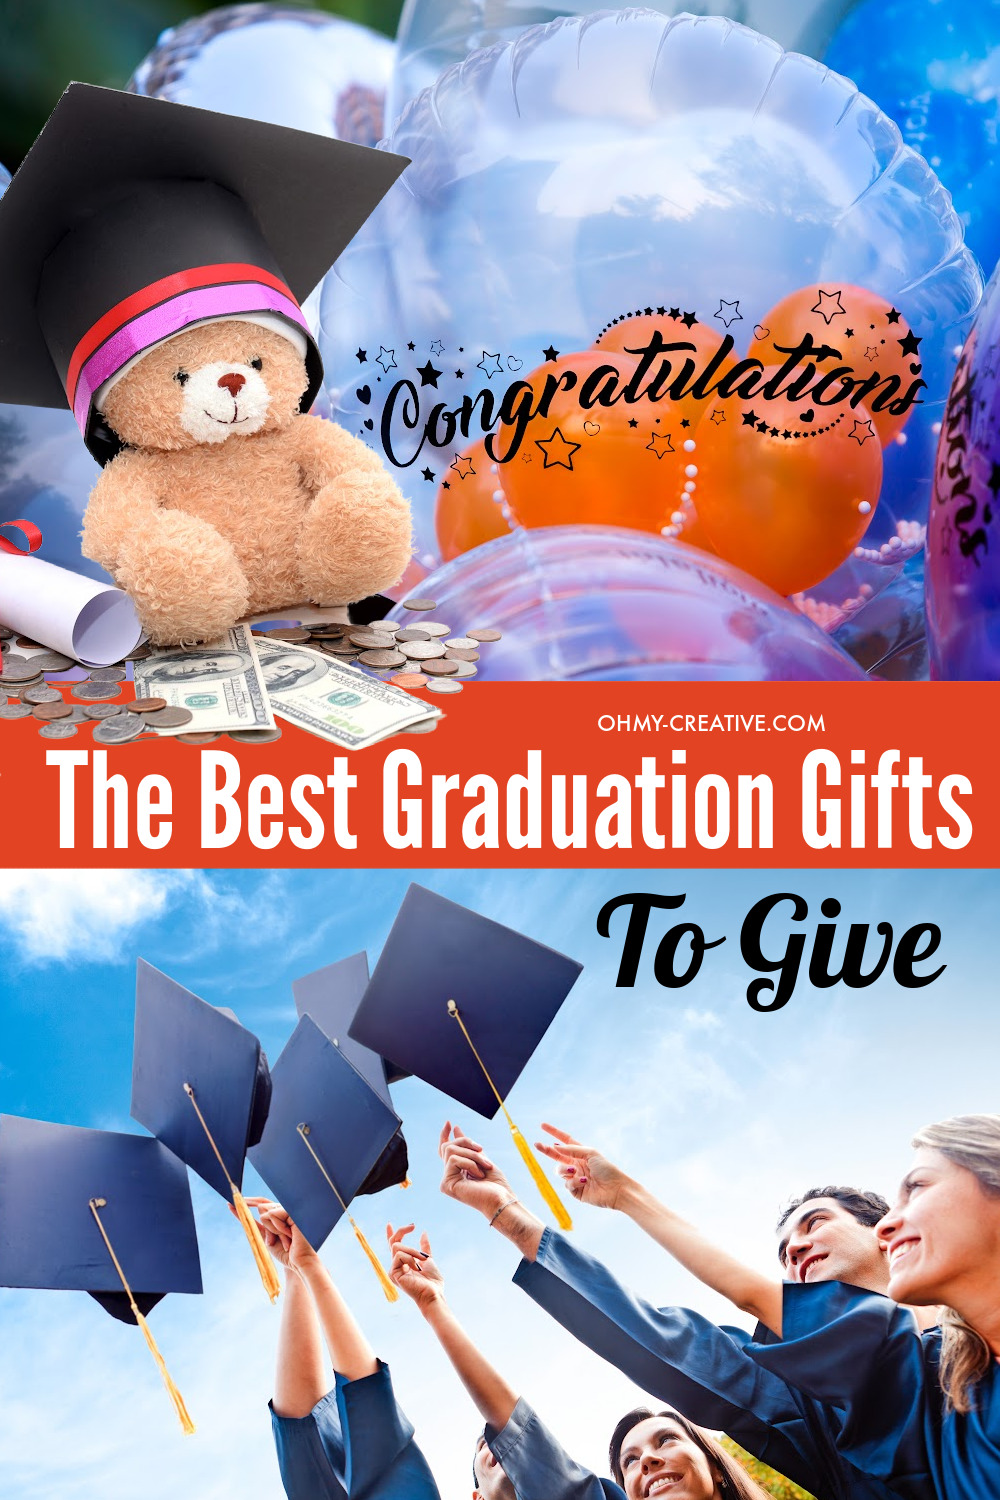 The Best Graduation Gifts To Give